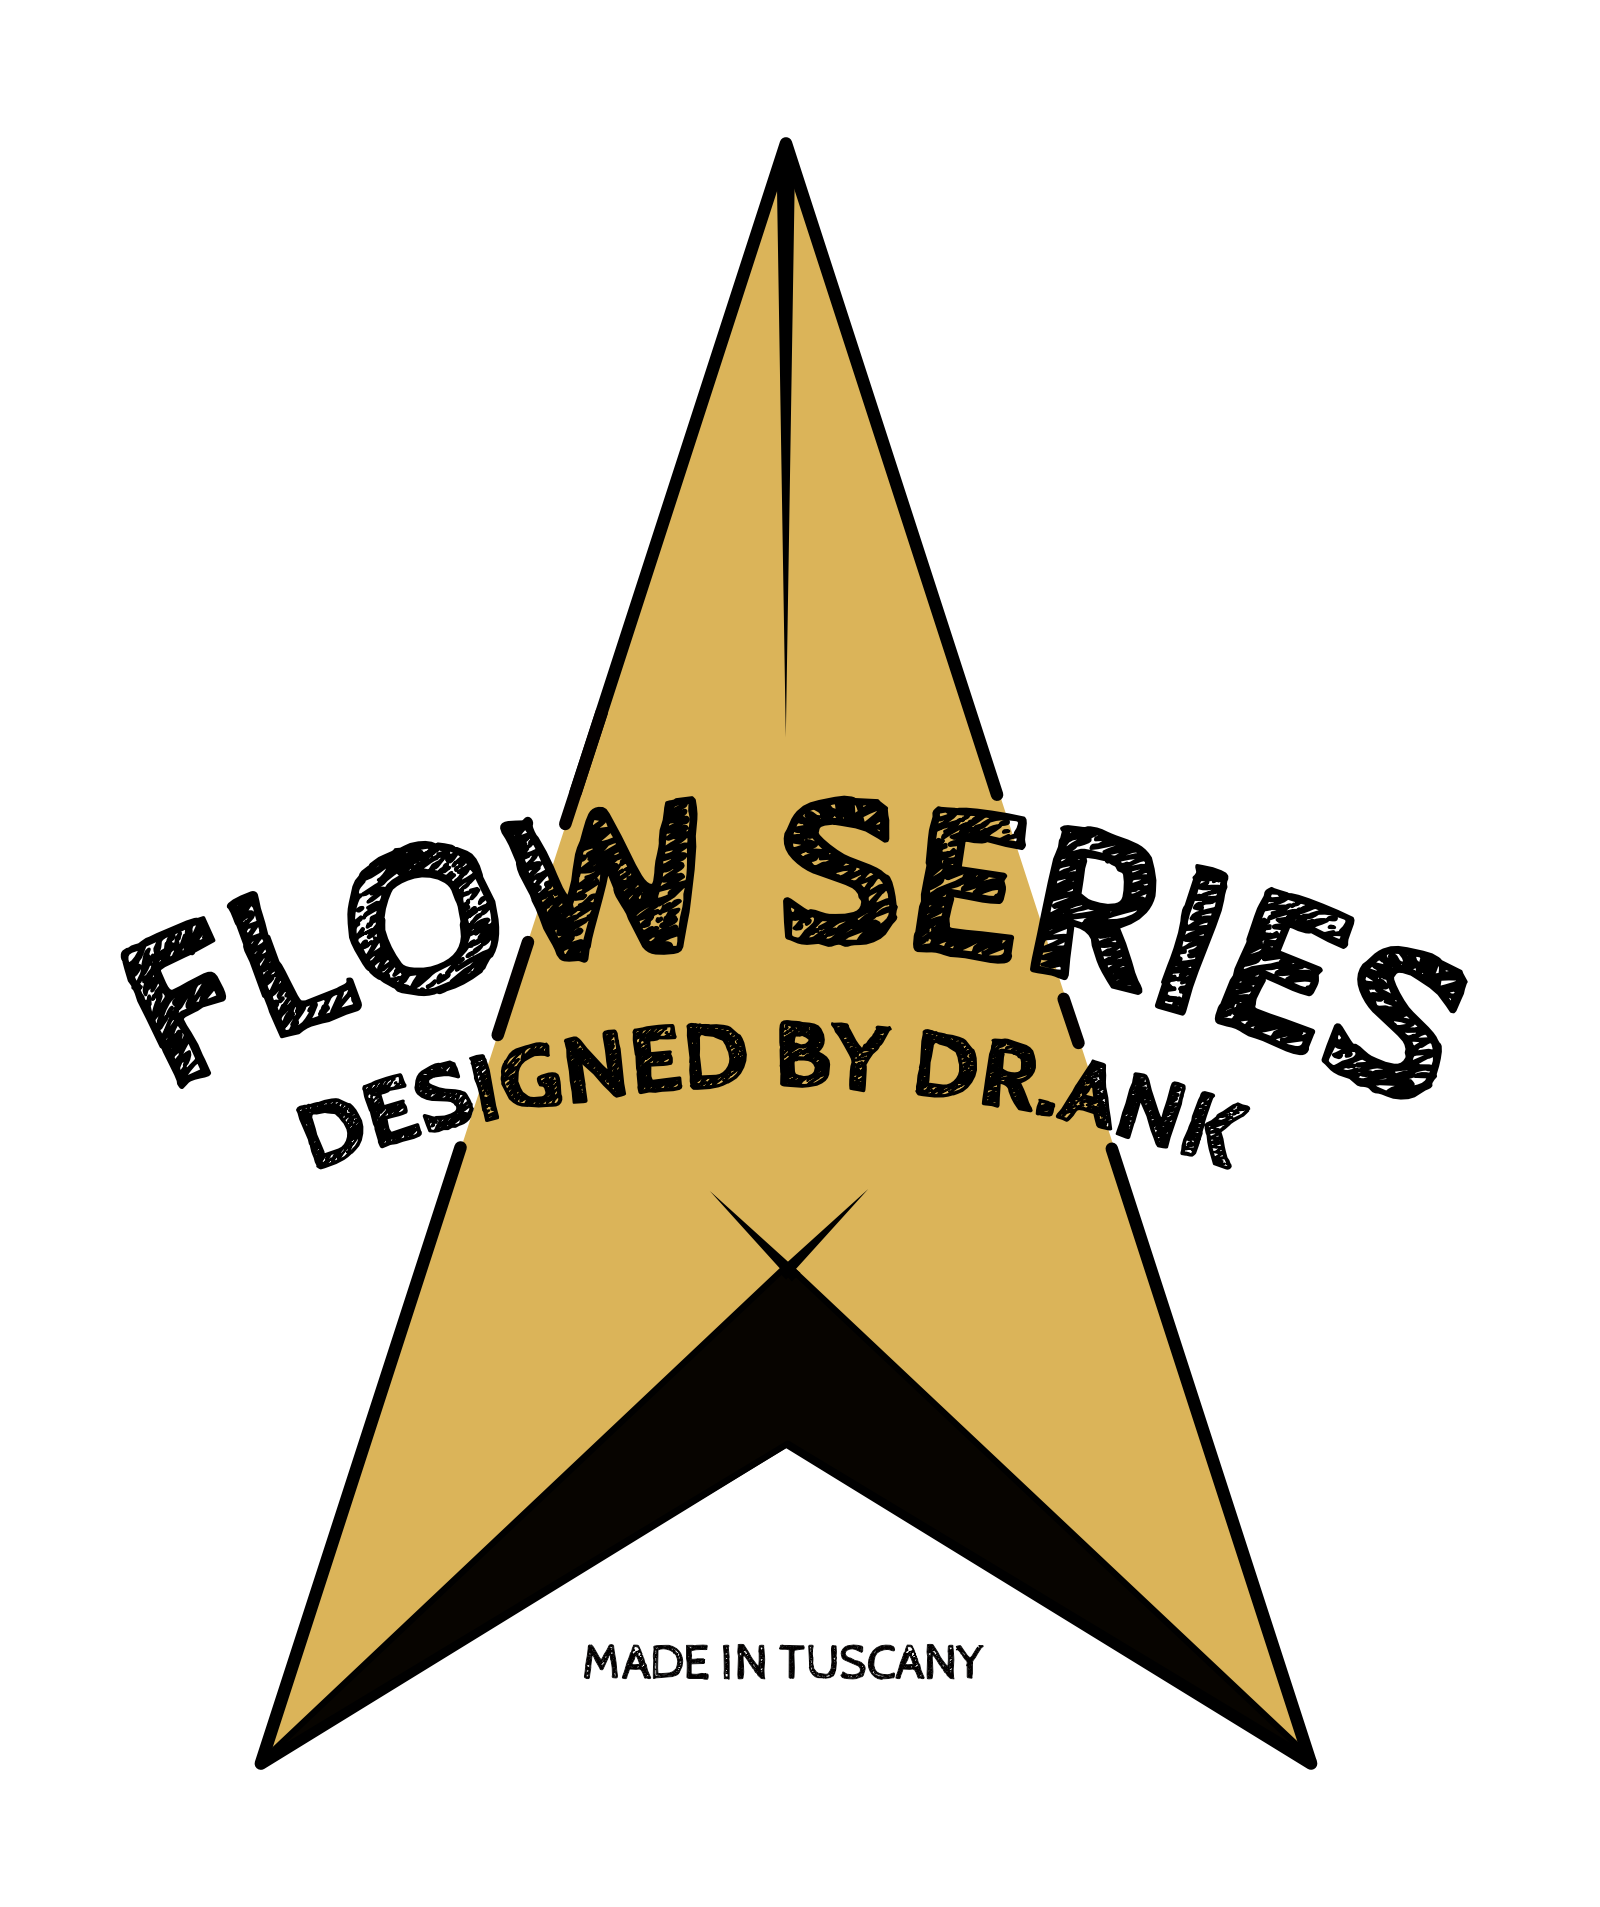 FLOW SERIES by Dr.ank Surfboards “Made in Tuscany”